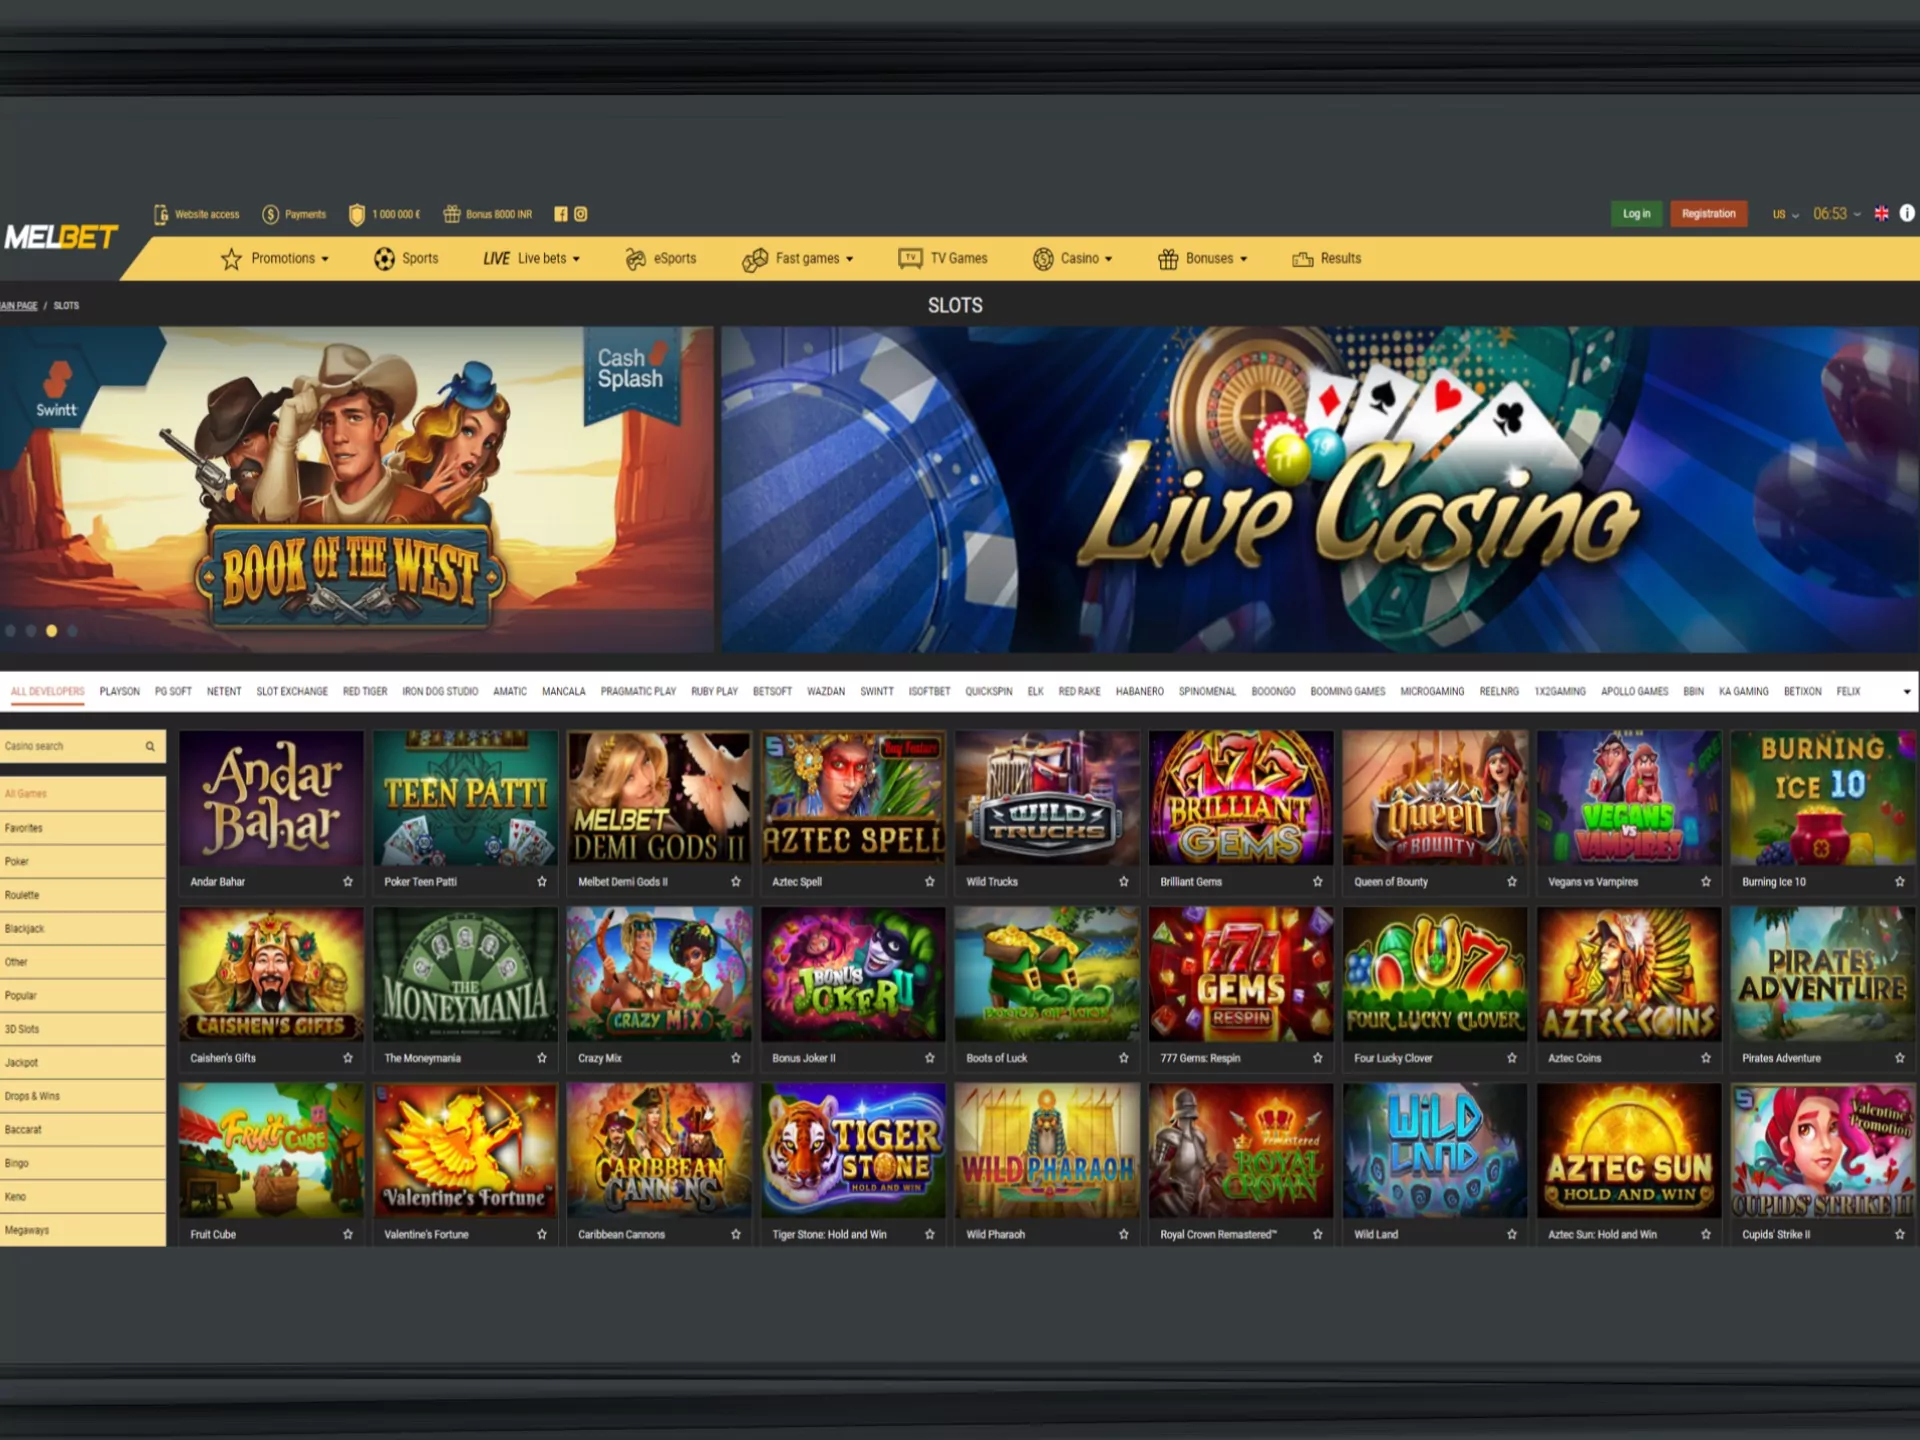 There are a lot of popular slots and other casino games from world's trustworthy providers.